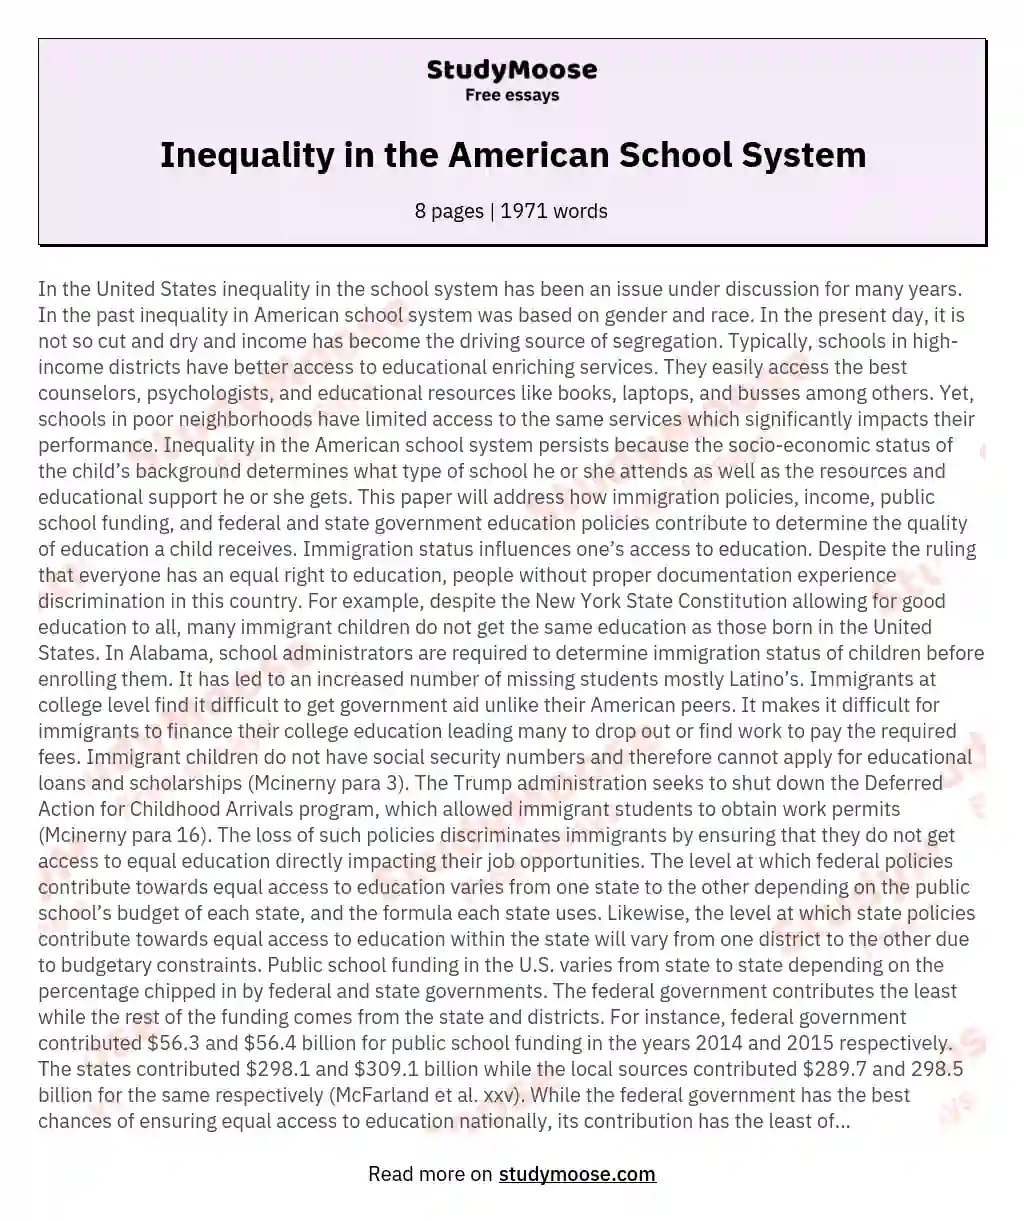 Inequality in the American School System essay